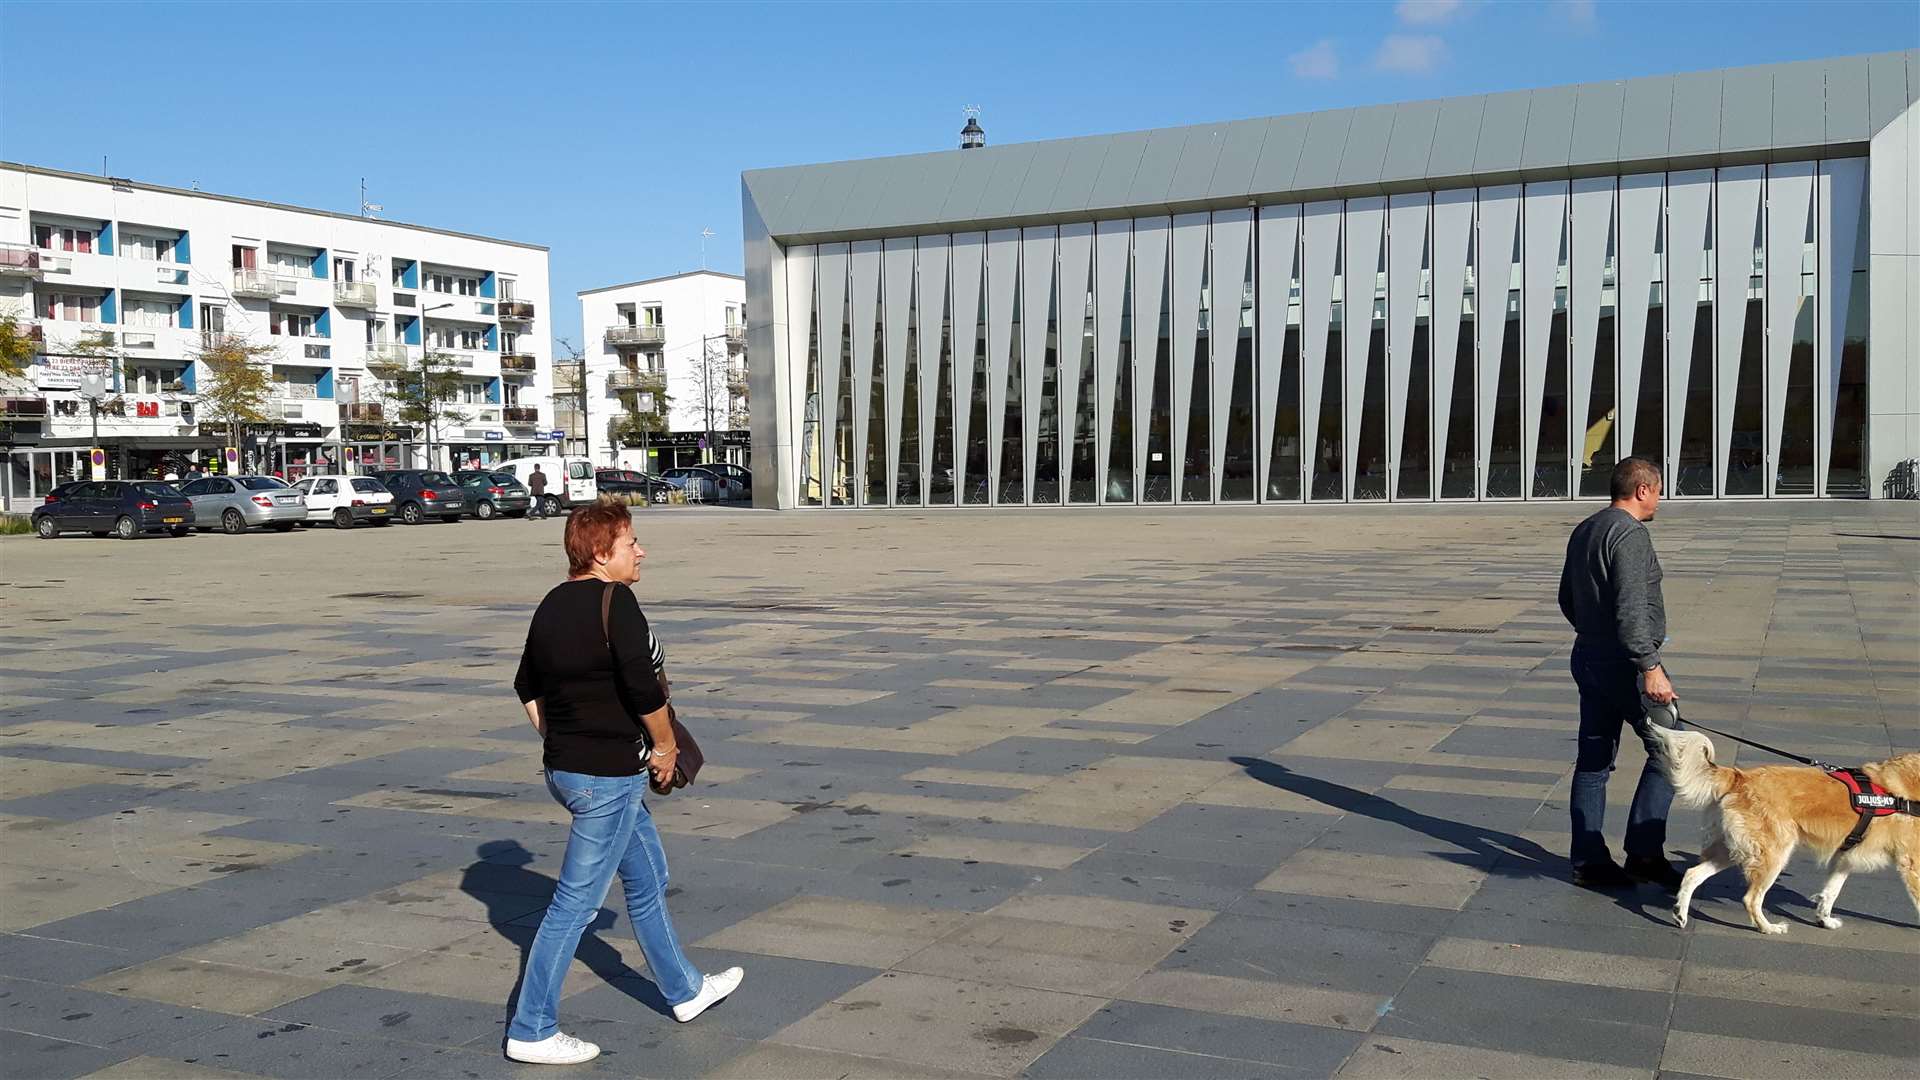 Place D'Armes, the main square of Calais, 2018. Library picture: Sam Lennon